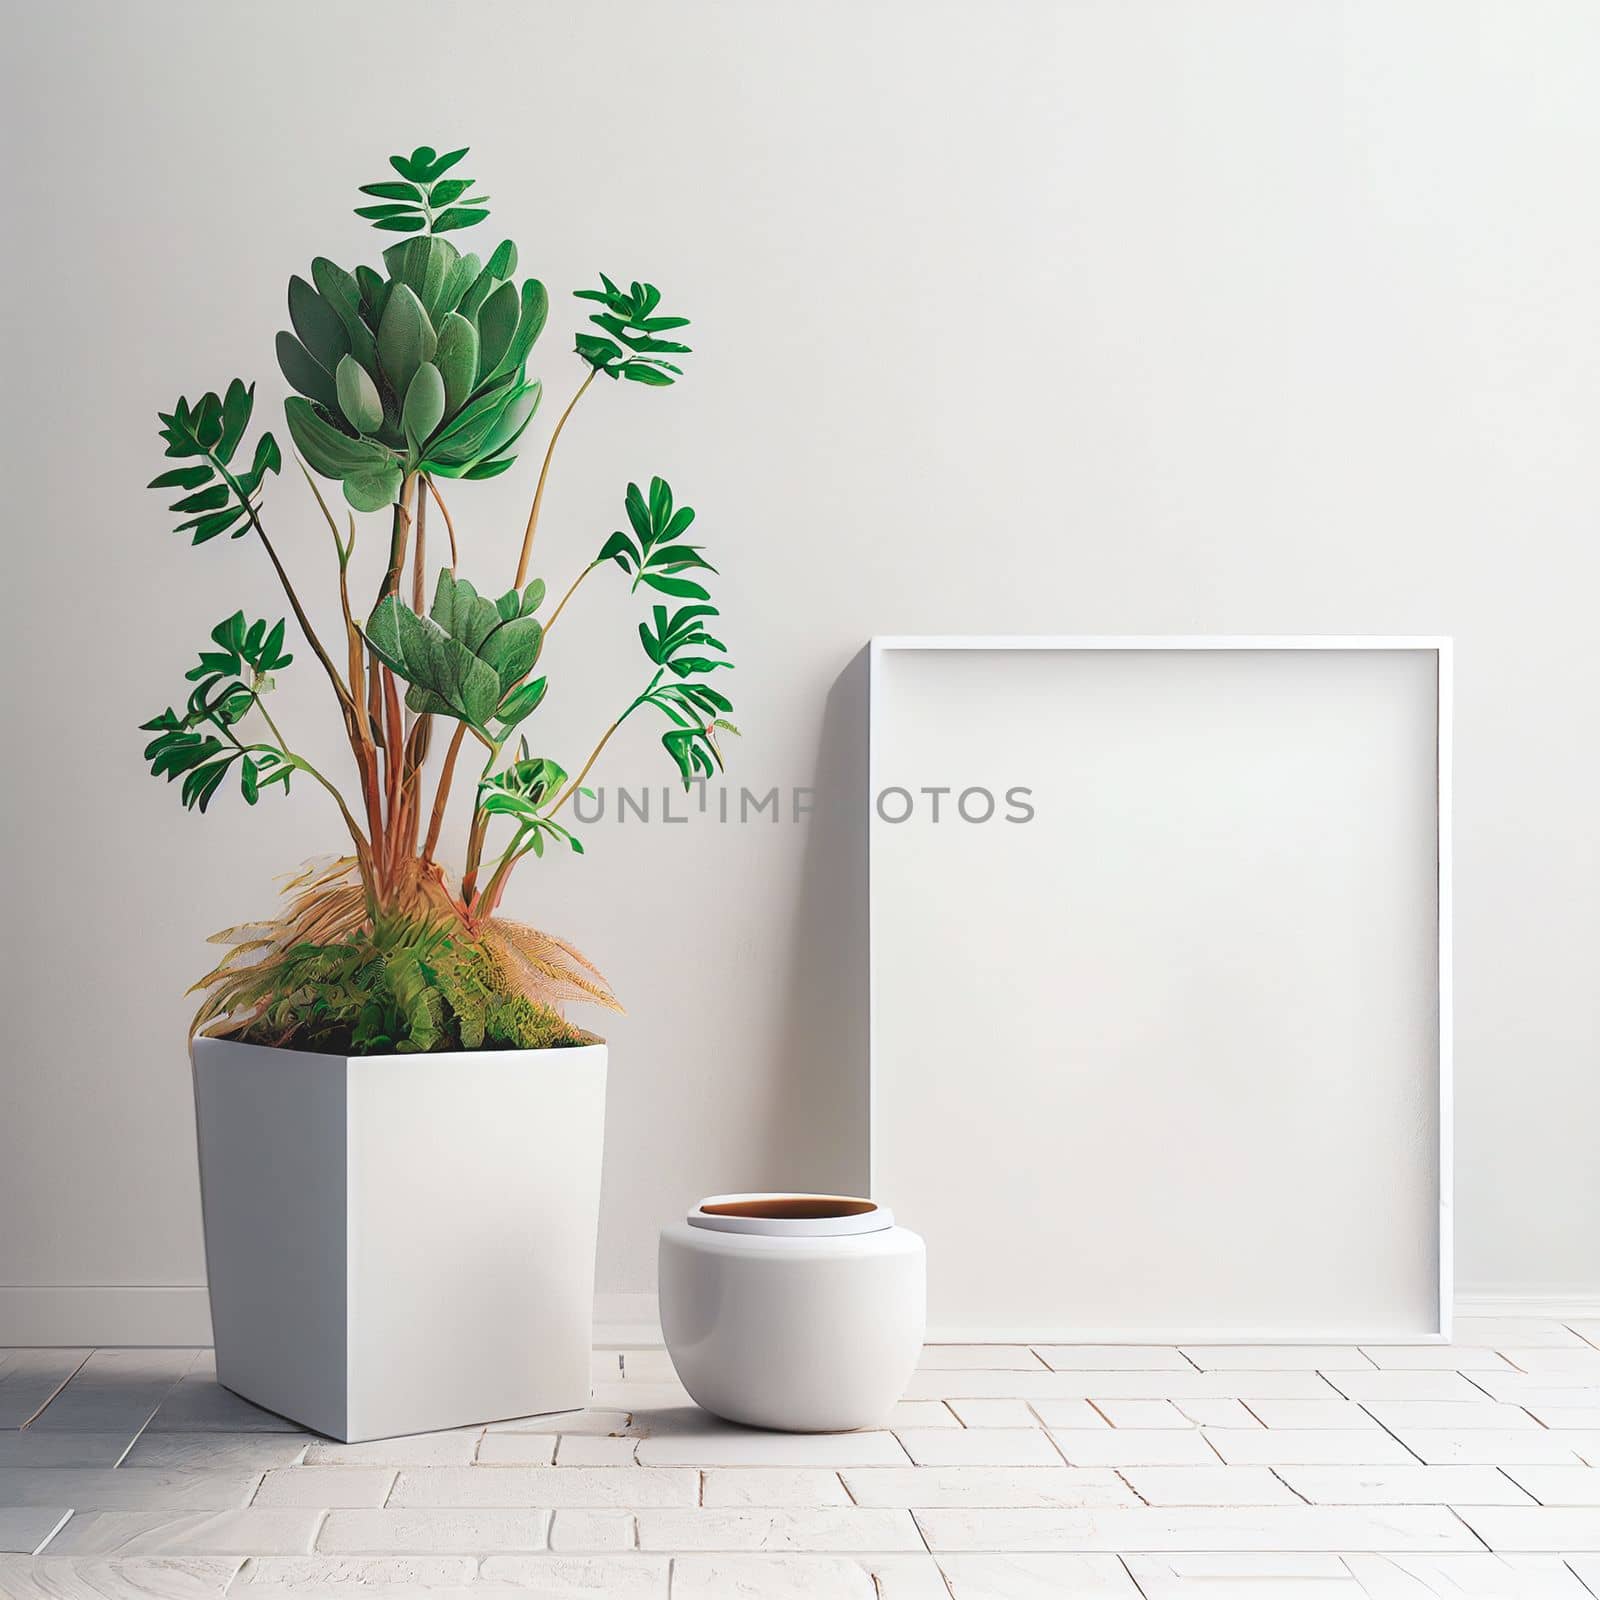 Mockup of empty frame displayed inside room interior with white wall background and plant pot nearby by FokasuArt